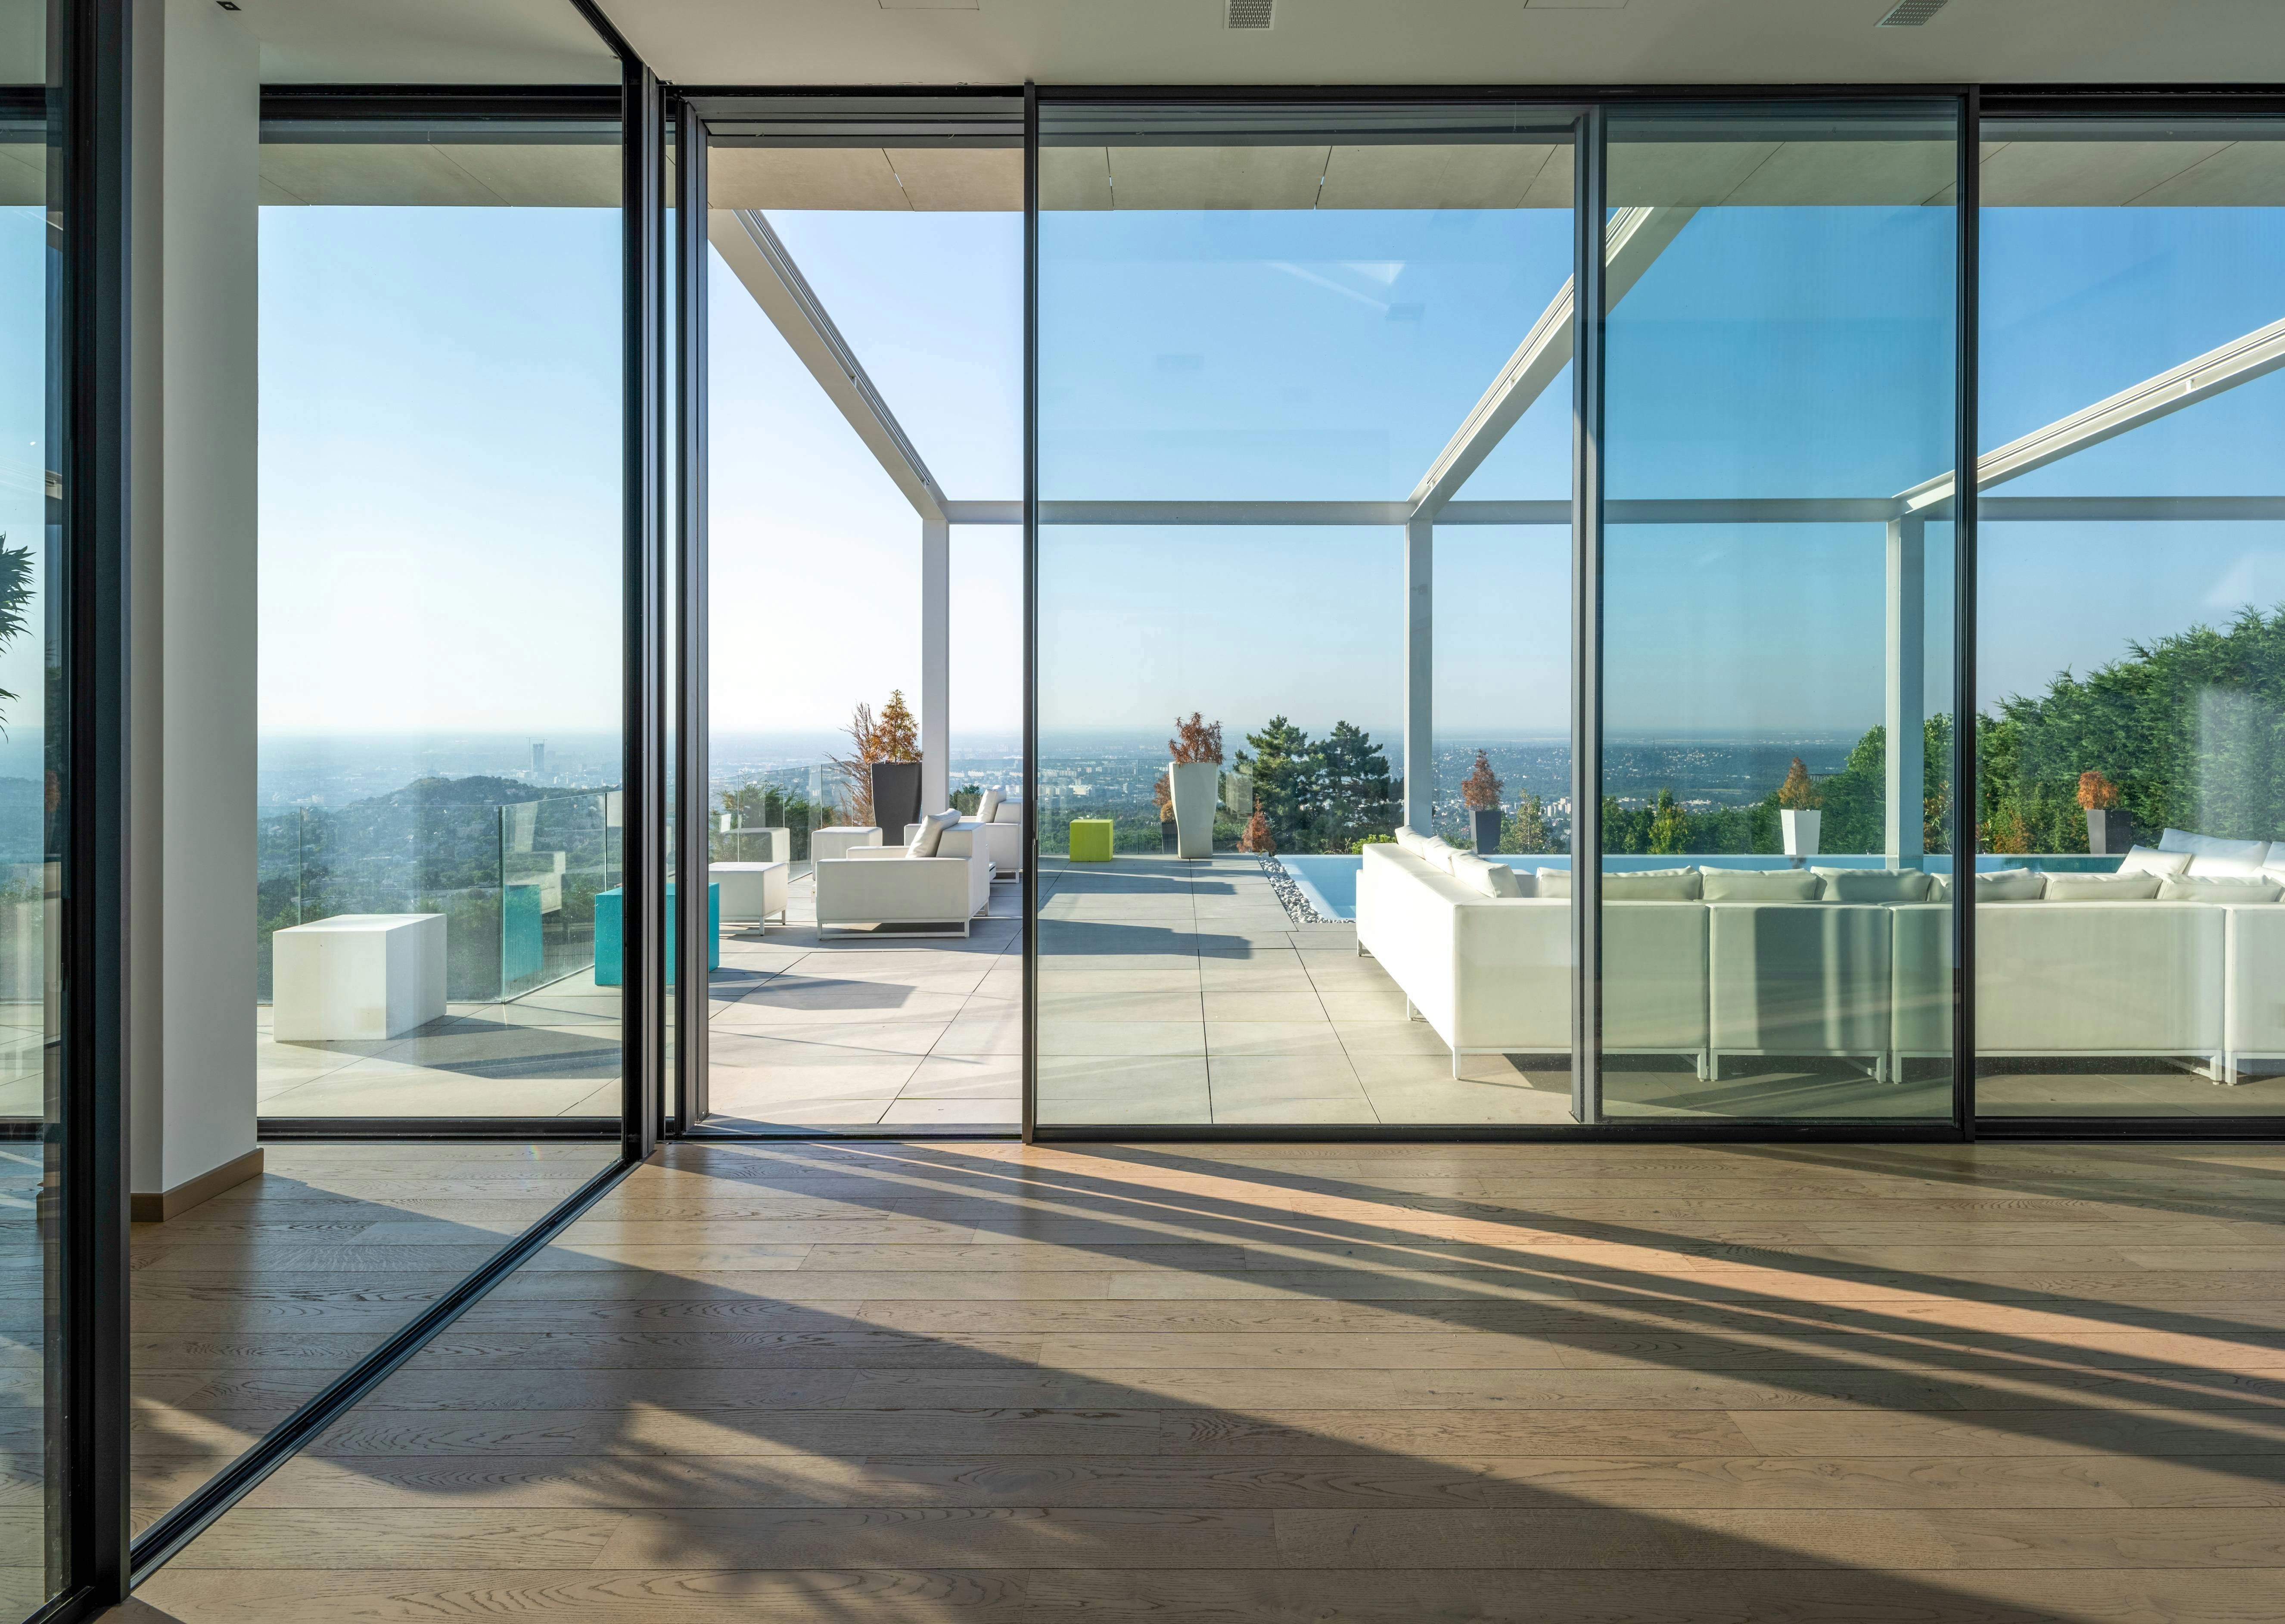 floor-to-ceiling glass walls